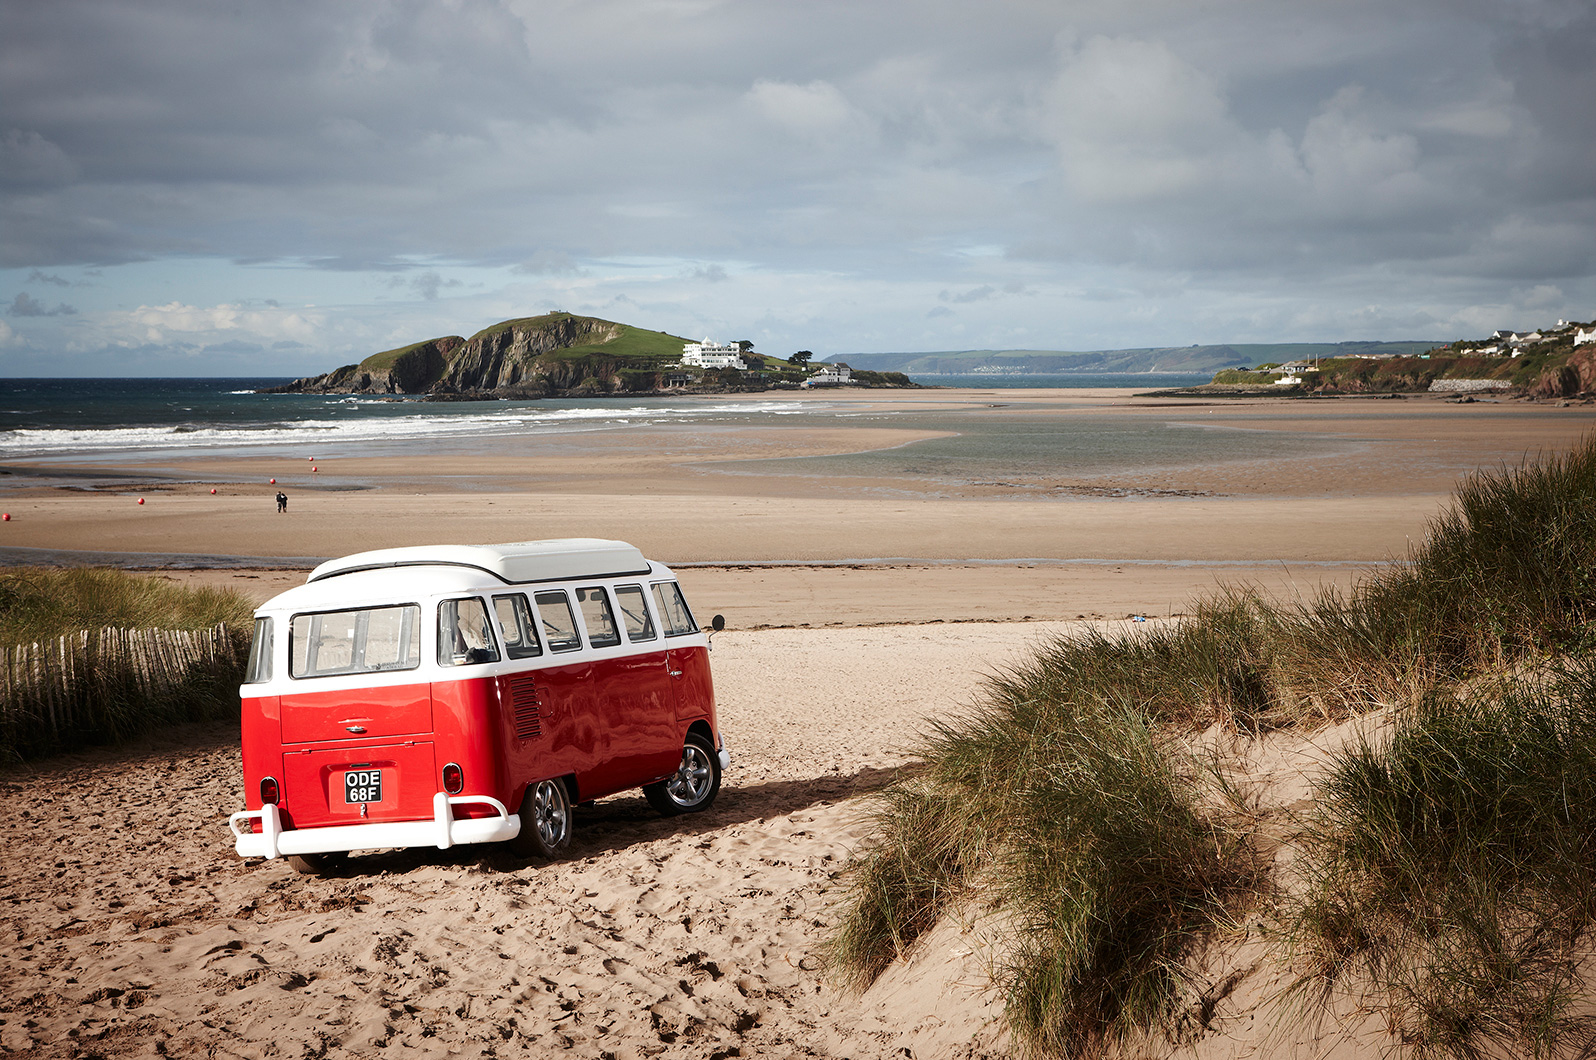 Image shot on Bantham Beach to show camper roof on a camper and to give a sense of the freedom of camping.